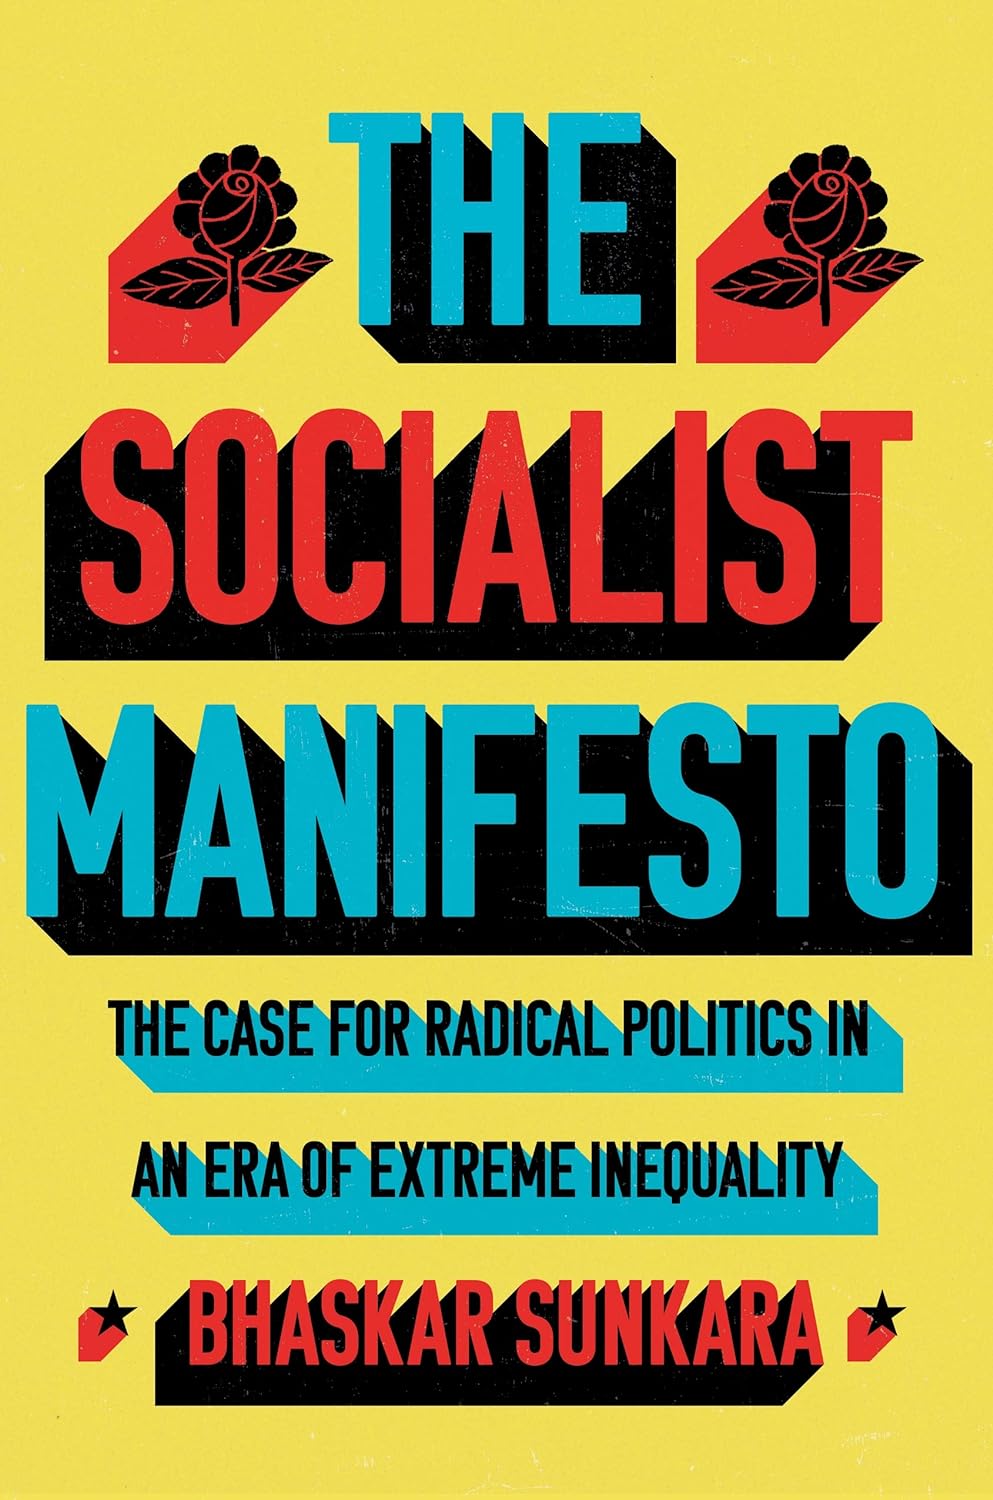 The Socialist Manifesto: The Case for Radical Politics in an Era of Extreme Inequality